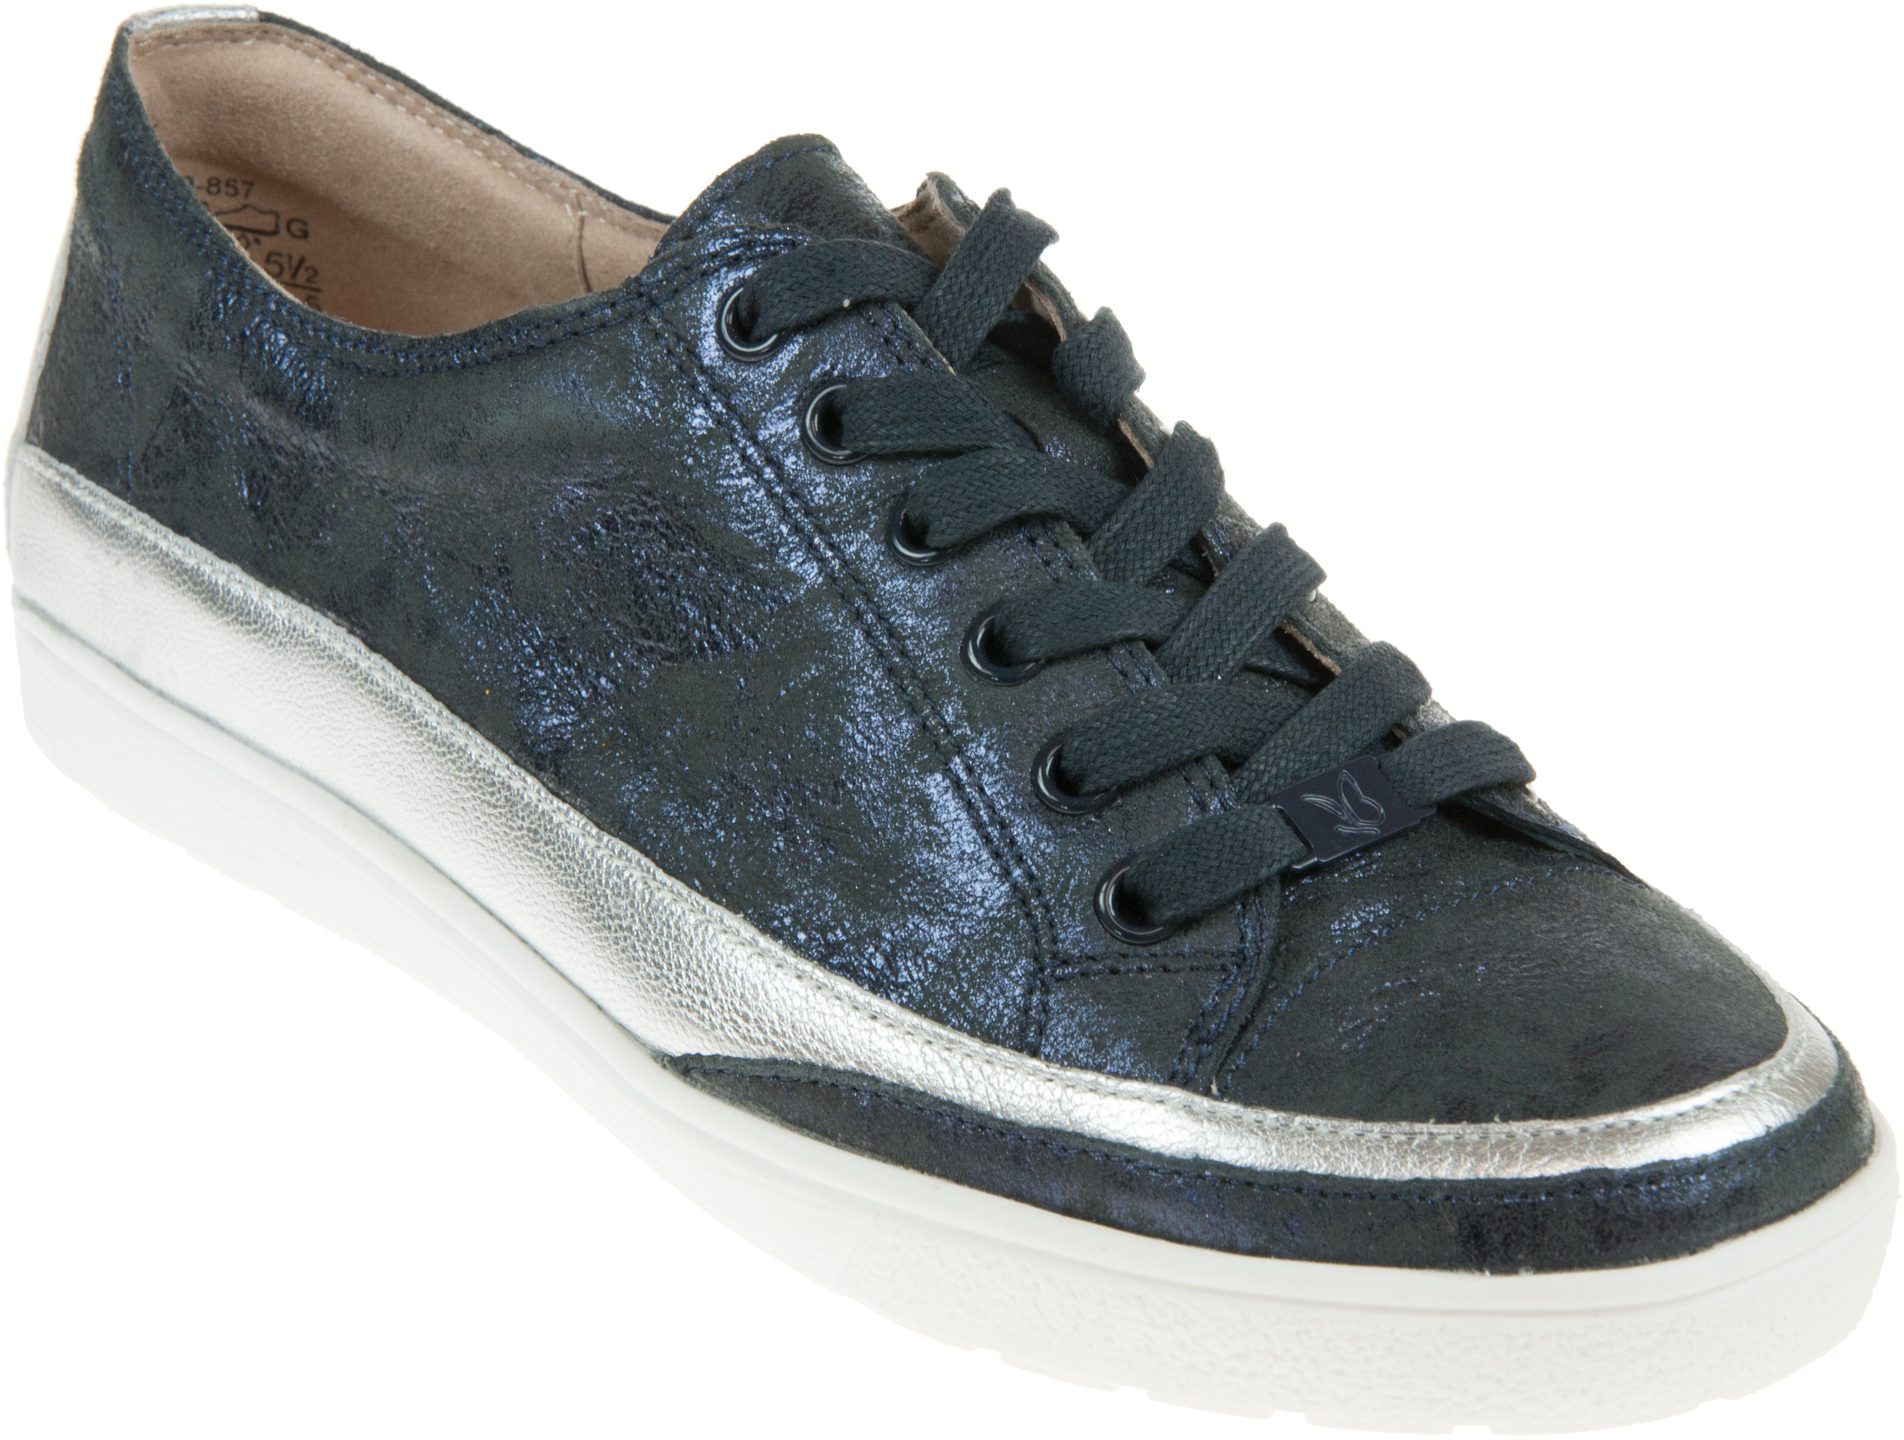 Caprice Manou Ocean Suede 23654-20 857 - Womens Trainers - Humphries Shoes